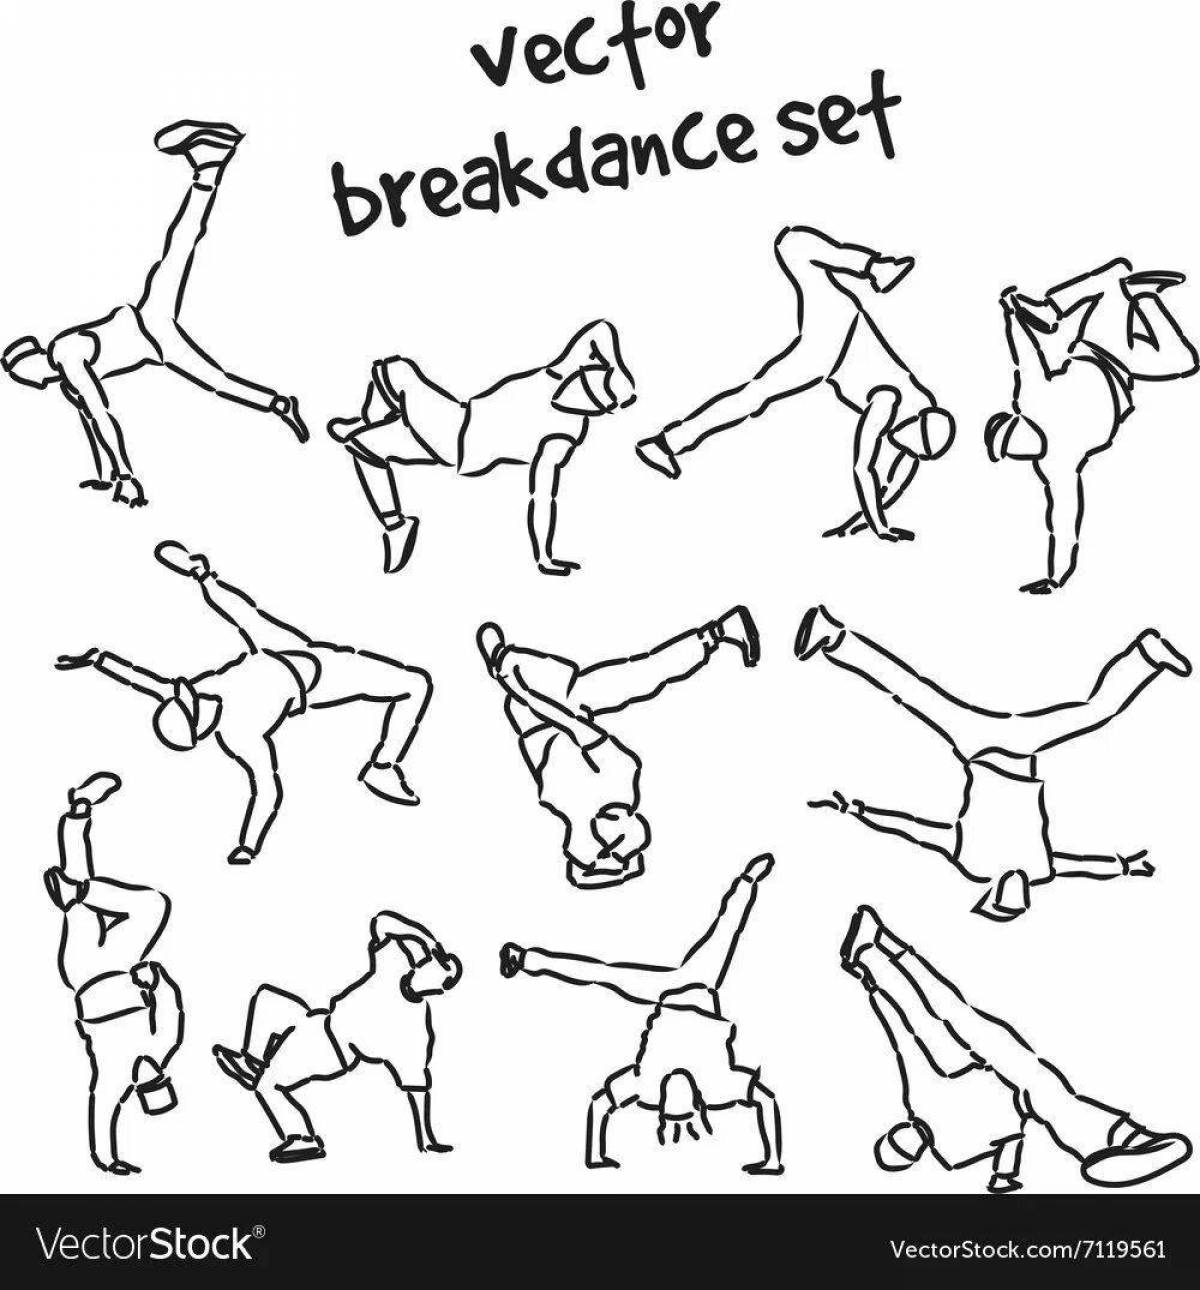 Great breakdance coloring page